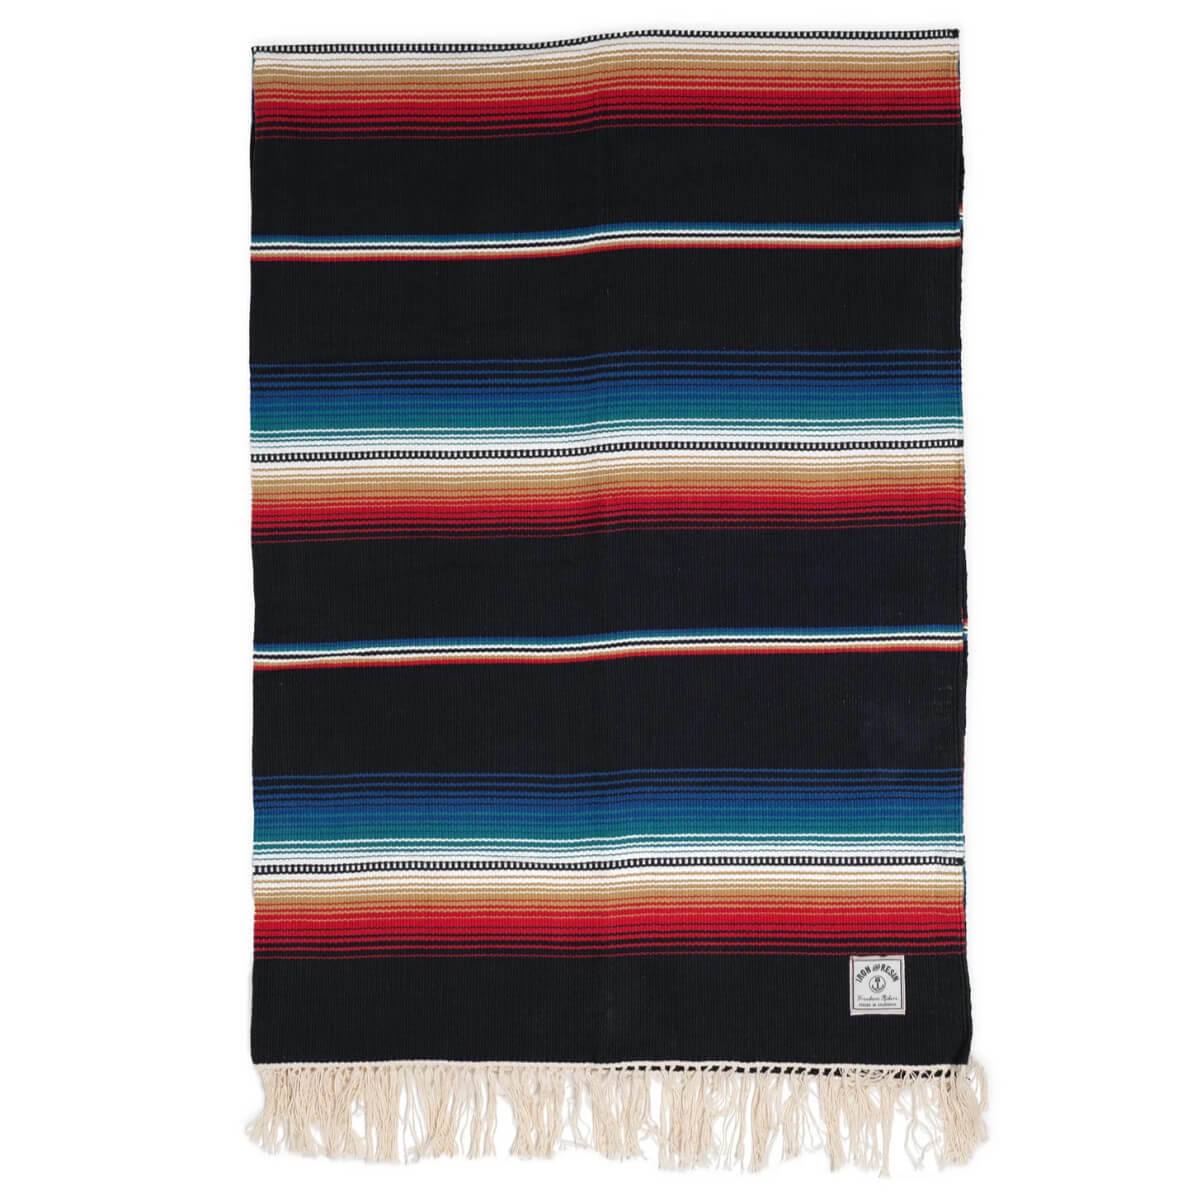 Iron and Resin Del Sol Cotton Blanket Black